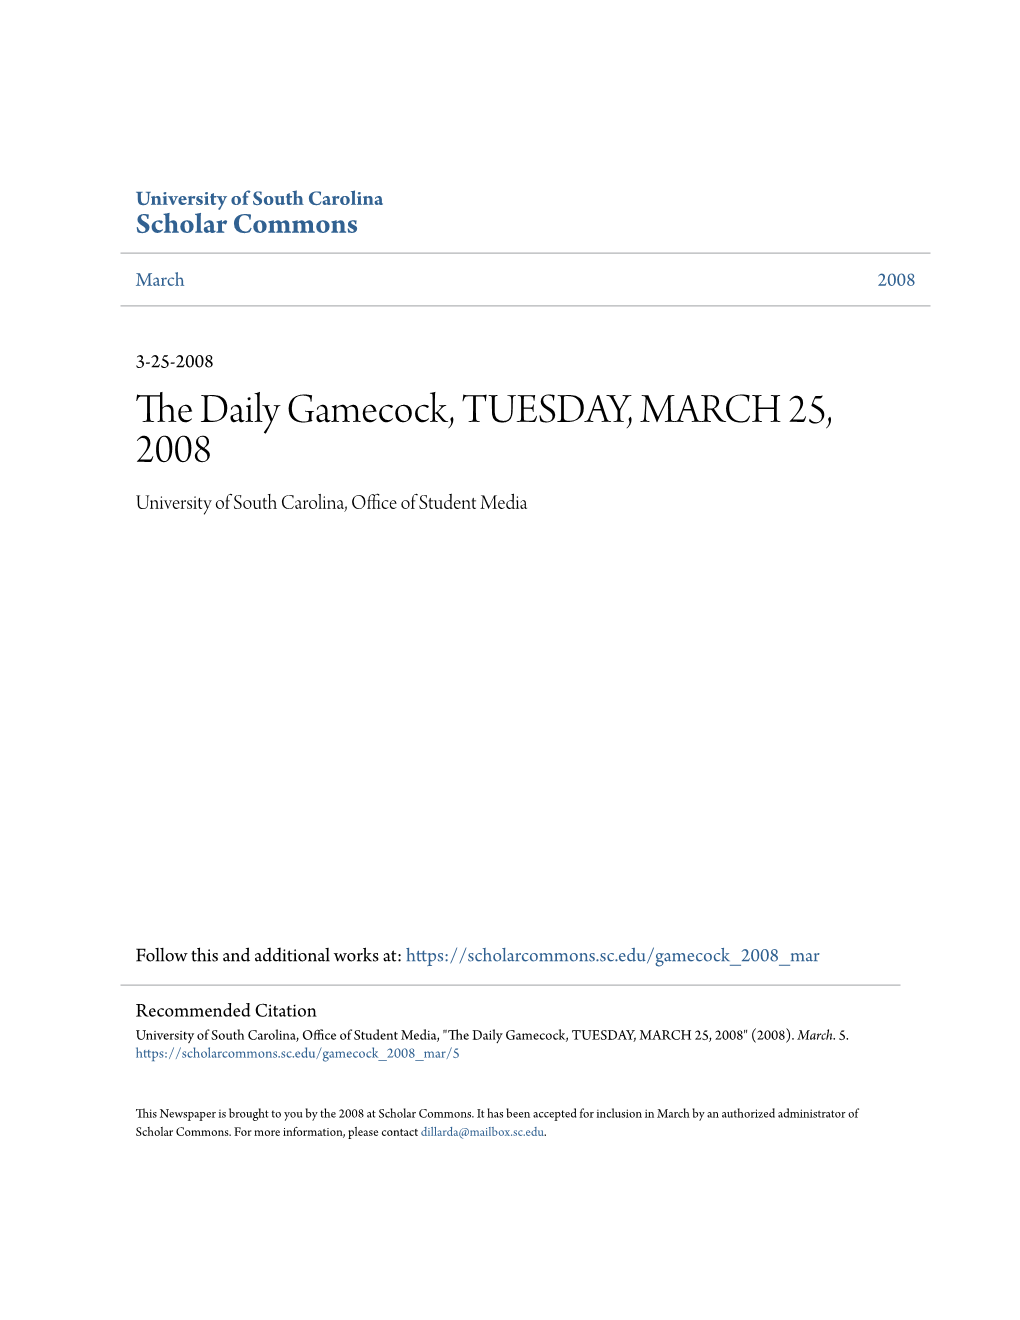 The Daily Gamecock, TUESDAY, MARCH 25, 2008